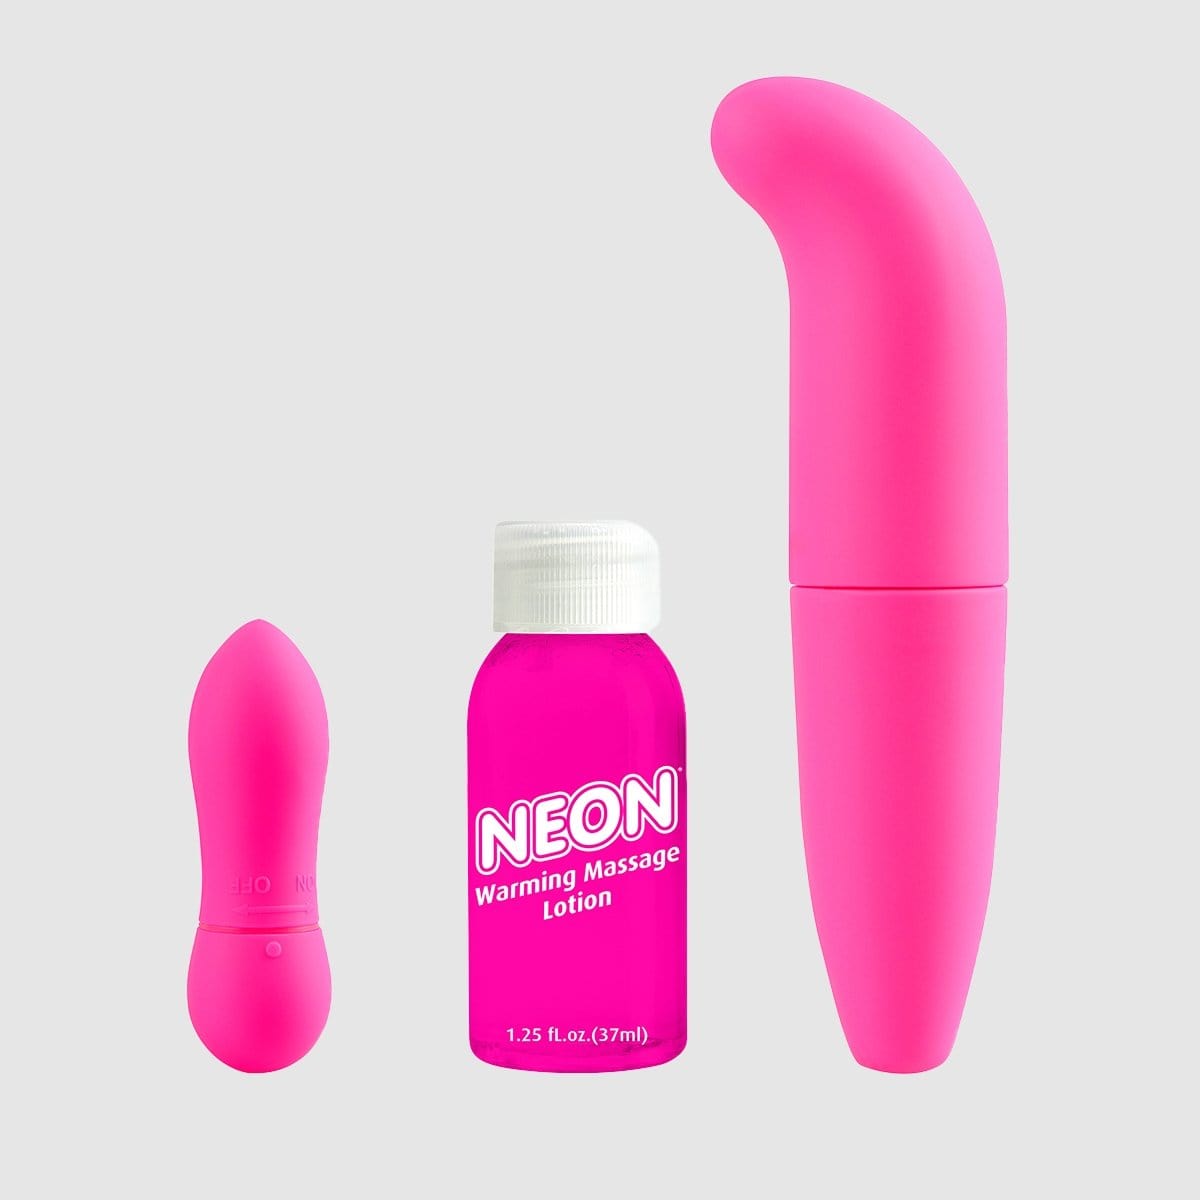 Neon Luv Touch Fantasy Kit - Pink - Thorn & Feather Sex Toy Canada